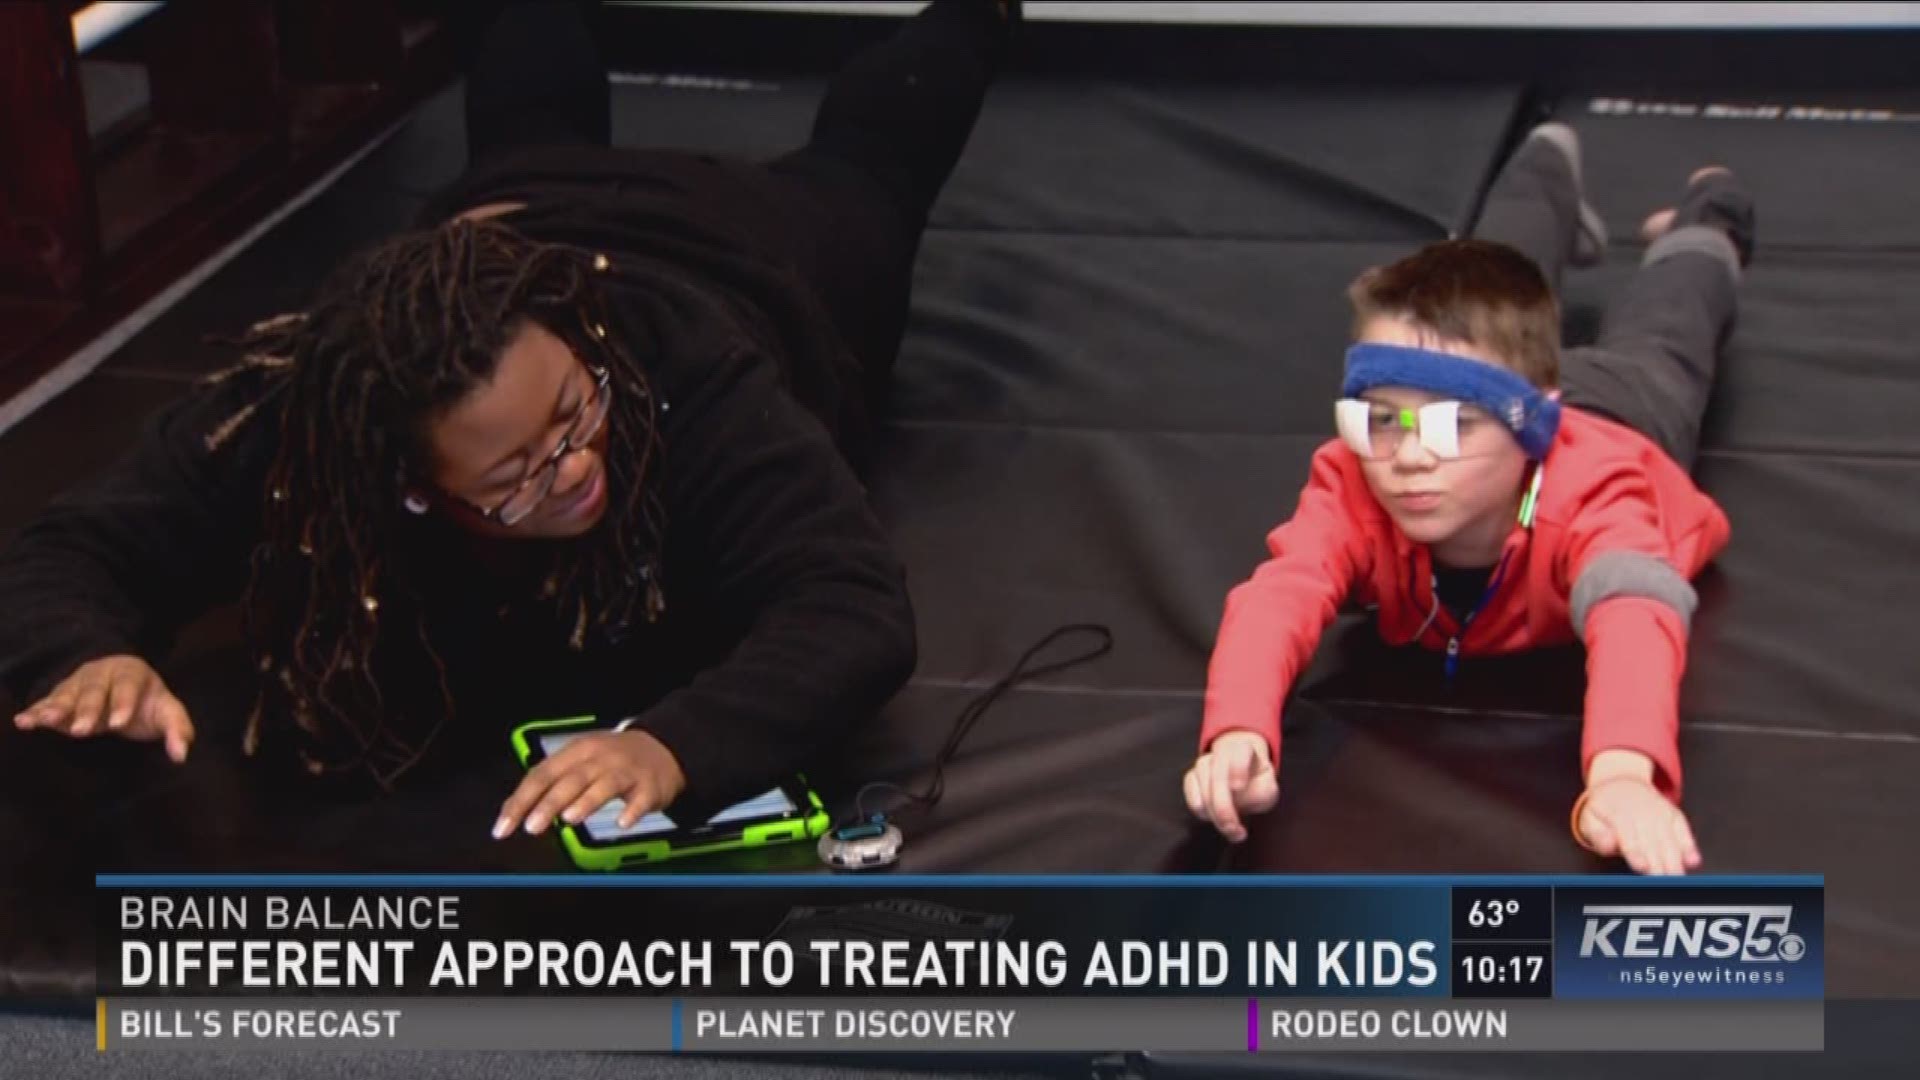 Different approach to treating ADHD in kids